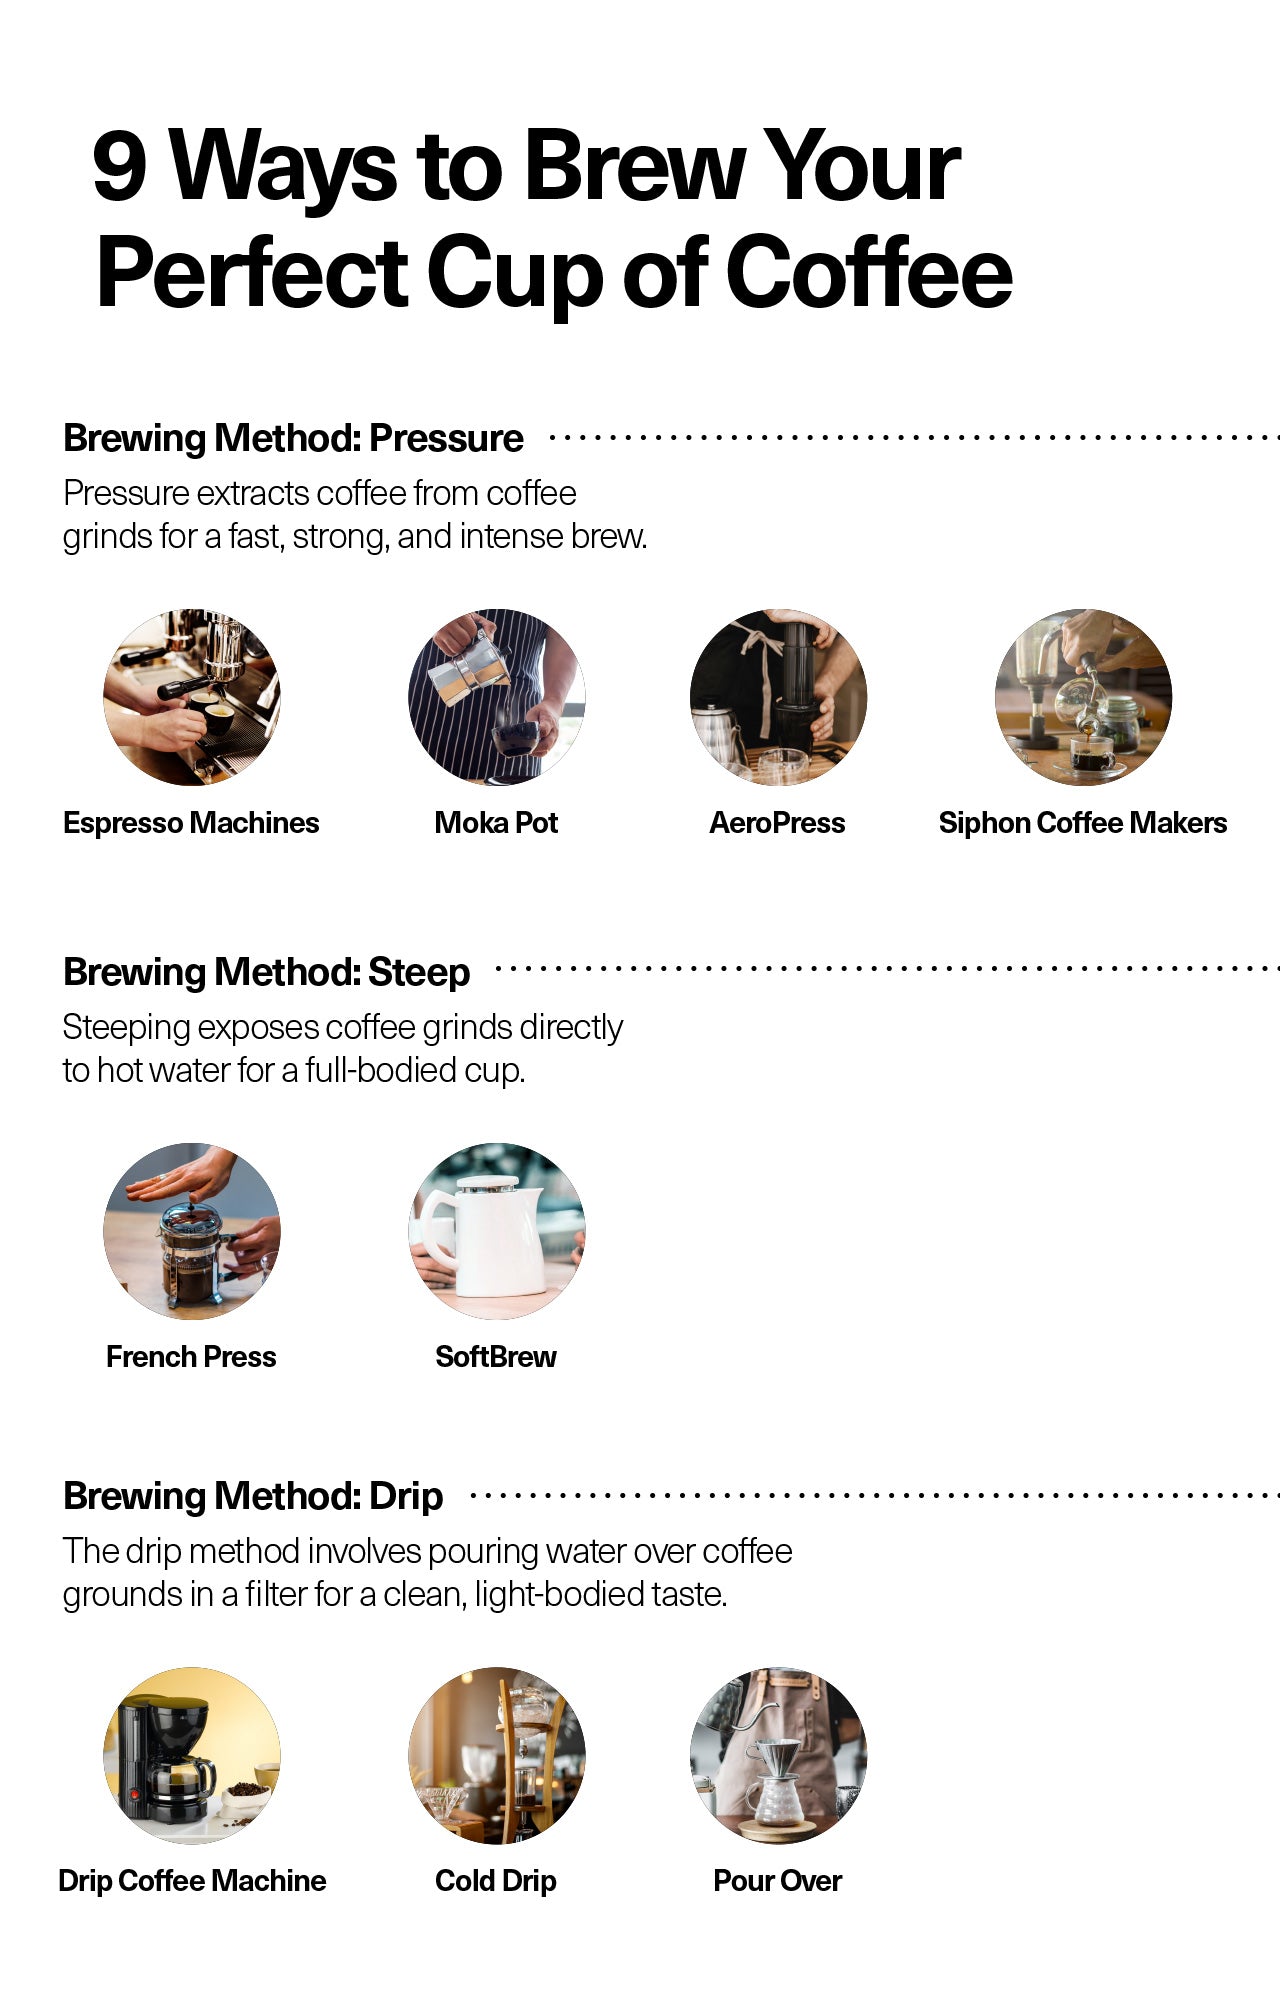 9 Ways to Brew Your Perfect Cup of Coffee